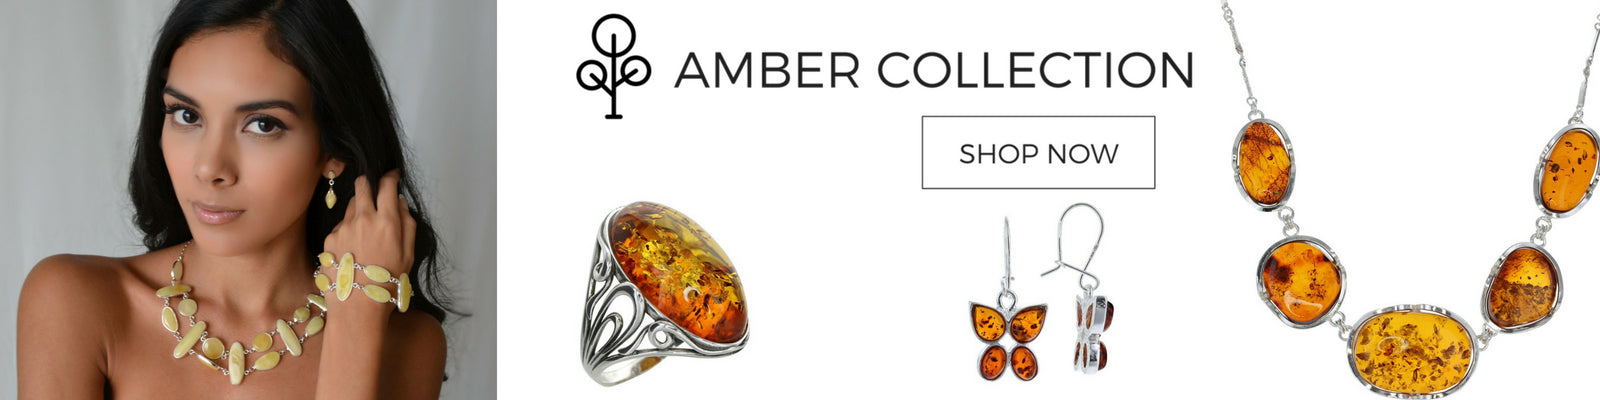 Amber Symbolism: What Does the Gemstone Represent?